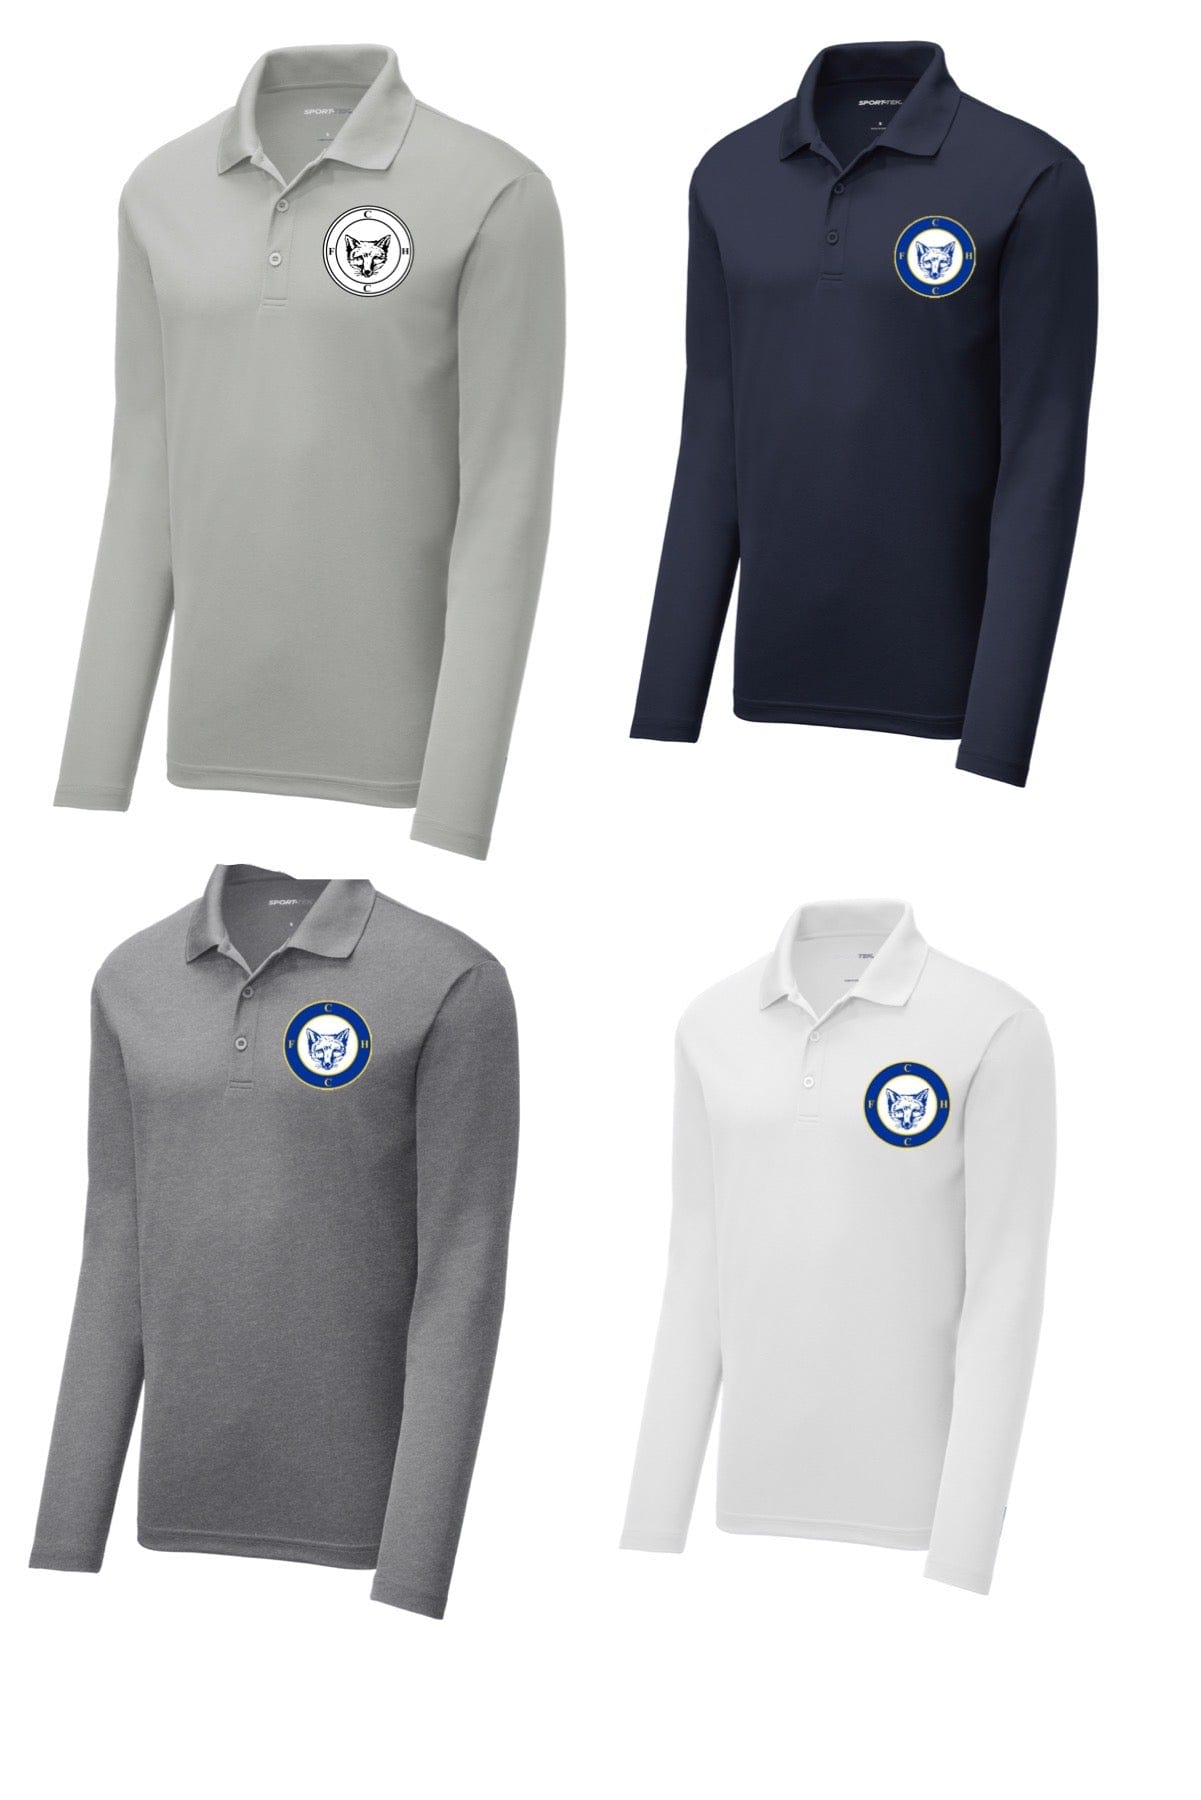 Equestrian Team Apparel FCHC Men's Long Sleeve Polo Shirt equestrian team apparel online tack store mobile tack store custom farm apparel custom show stable clothing equestrian lifestyle horse show clothing riding clothes horses equestrian tack store